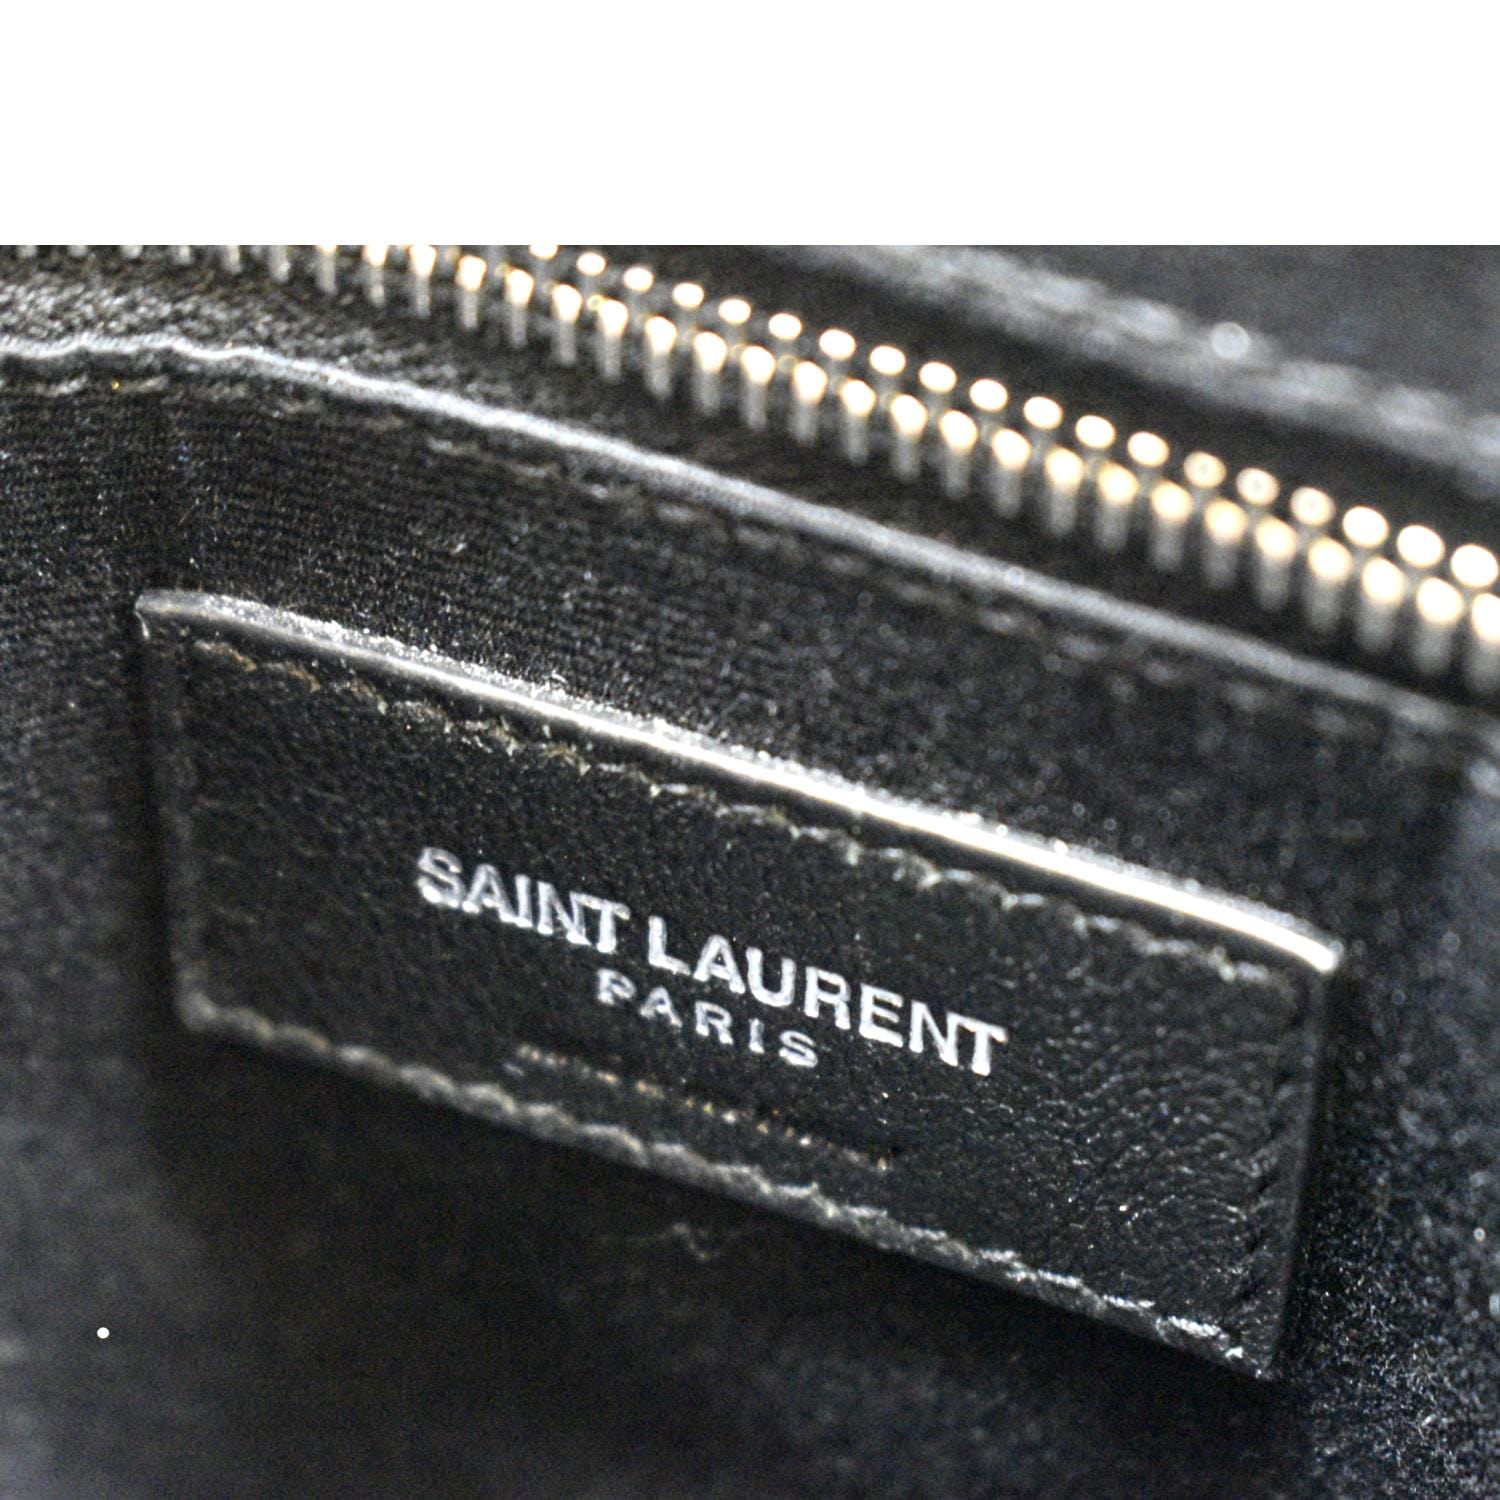 As you can see in the fake vs real Yves Saint Laurent Loulou bag